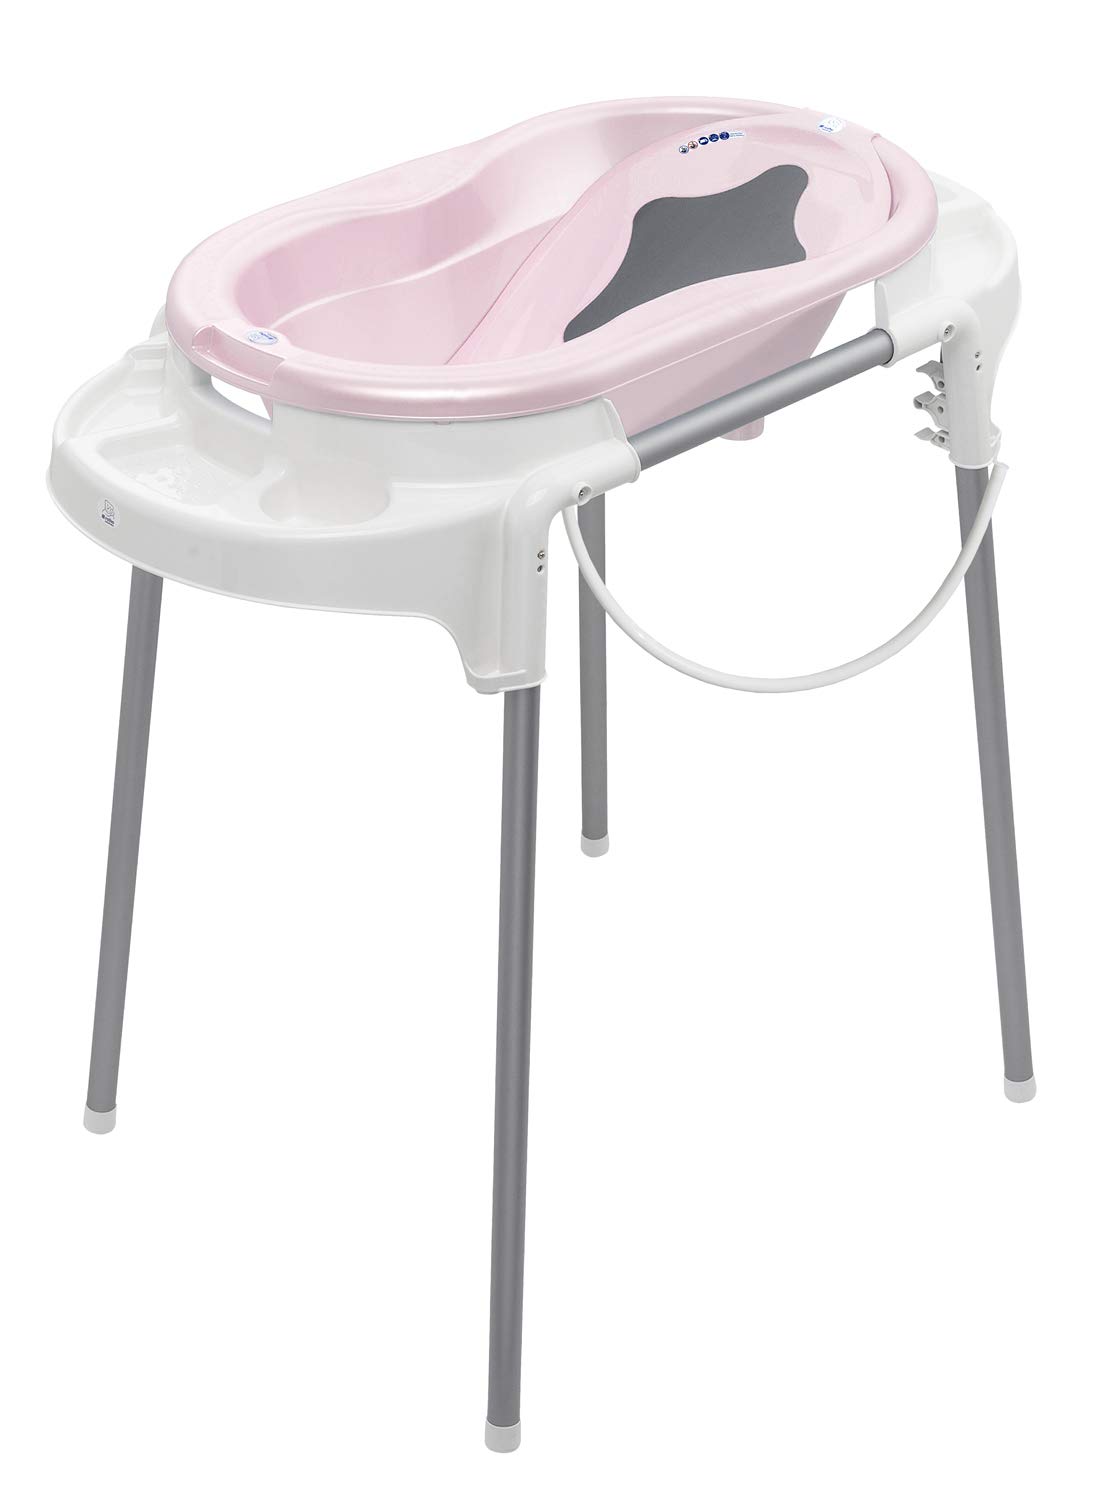 Rotho Babydesign Top 21042 0248 01 Bath Station with Baby Bath, Bath Stand, Bath Insert and Drain Hose, 0-12 Months, Pink